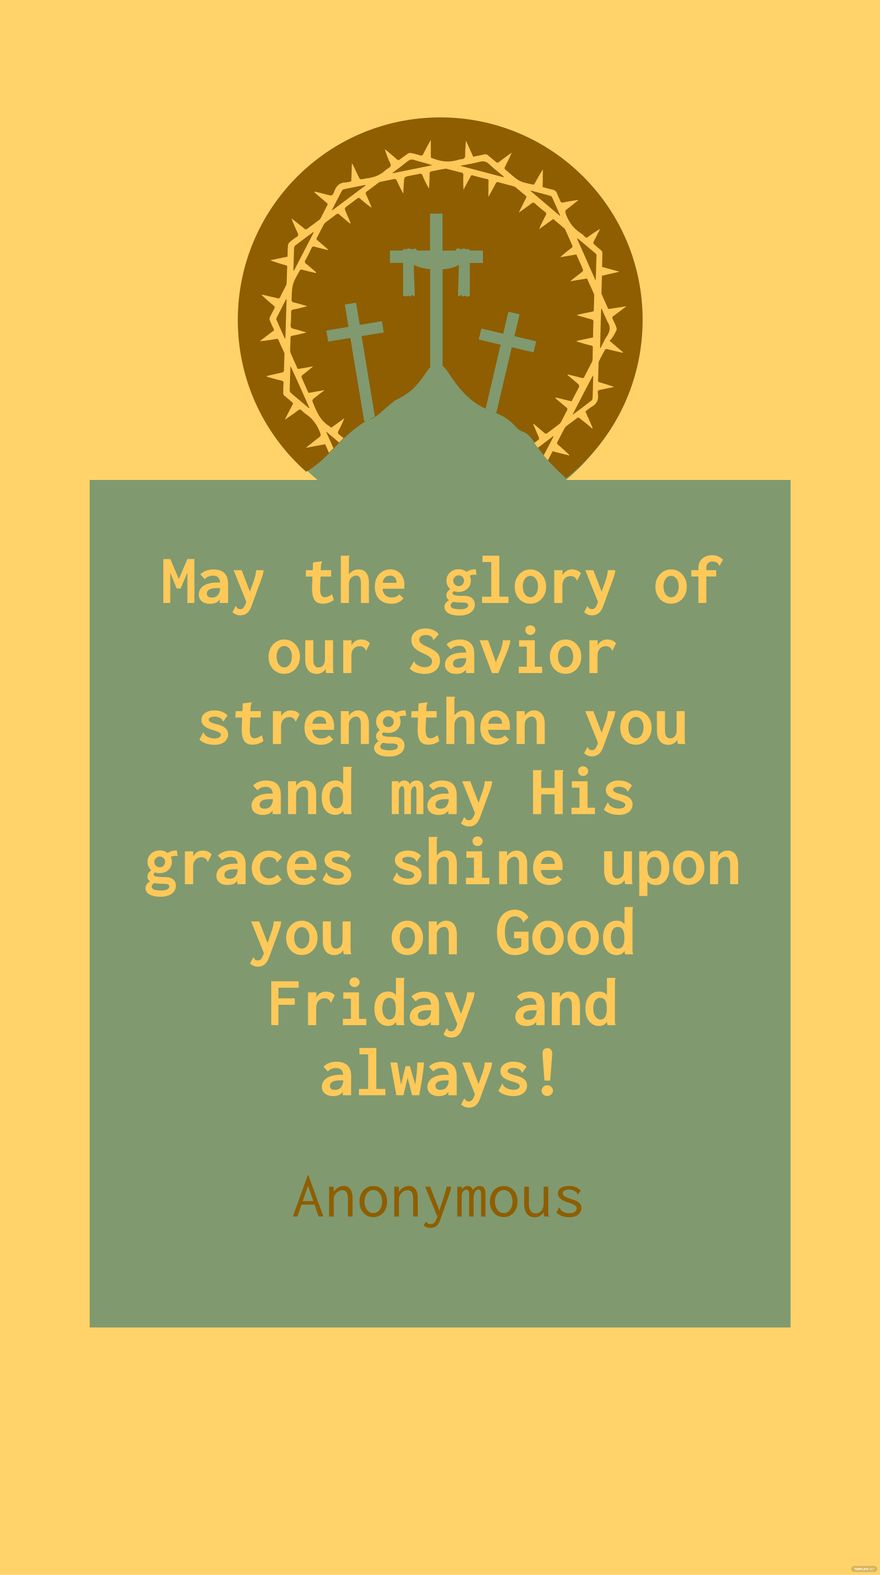 Anonymous - May the glory of our Savior strengthen you and may His graces shine upon you on Good Friday and always! in JPG